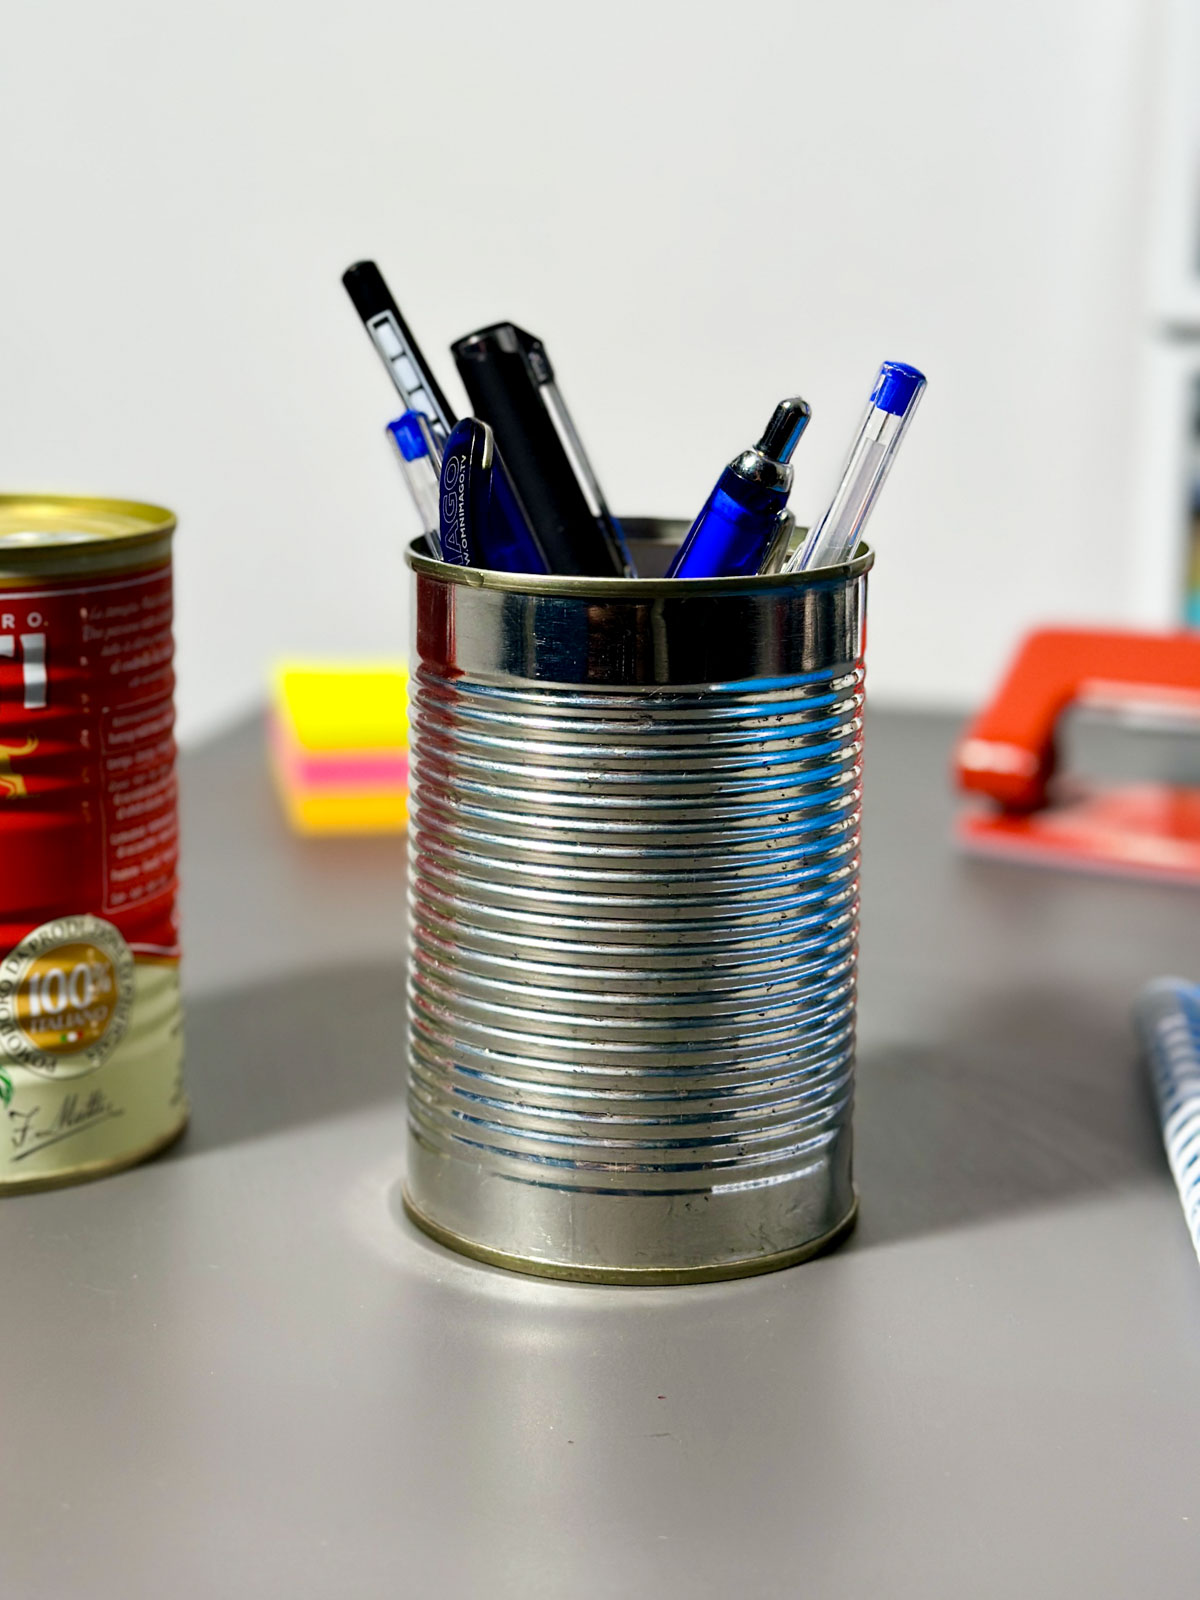  Reuse Tin Cans as Pen Holders